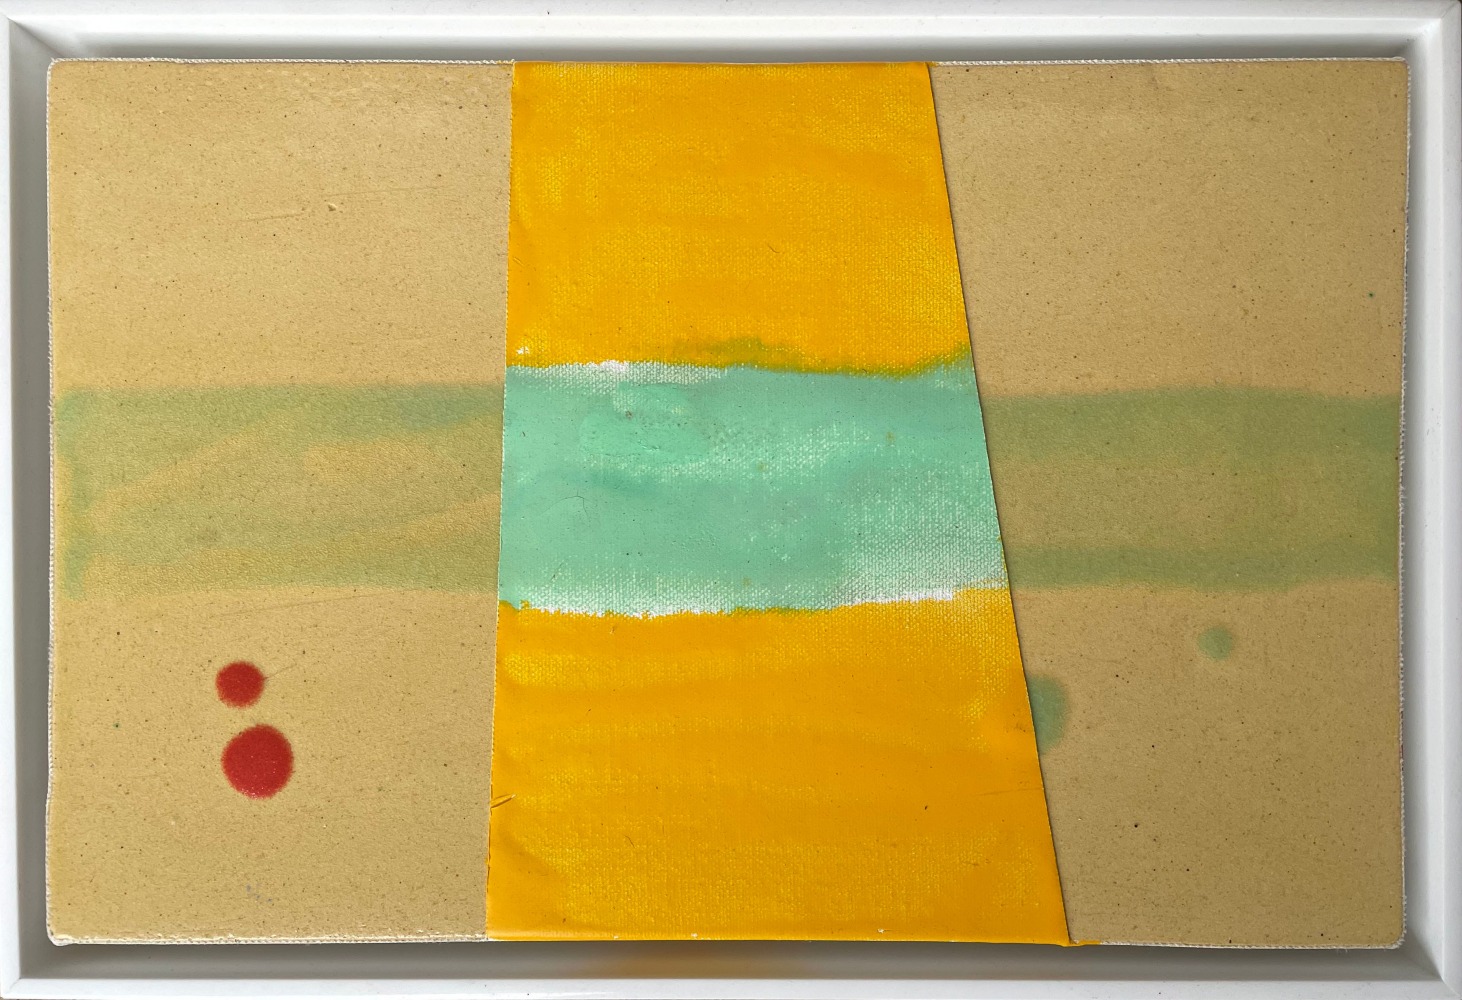 Frank.Olt.Untitled.Encaustic.on.Canvas.with.Ceramic.yellow.and.aqua